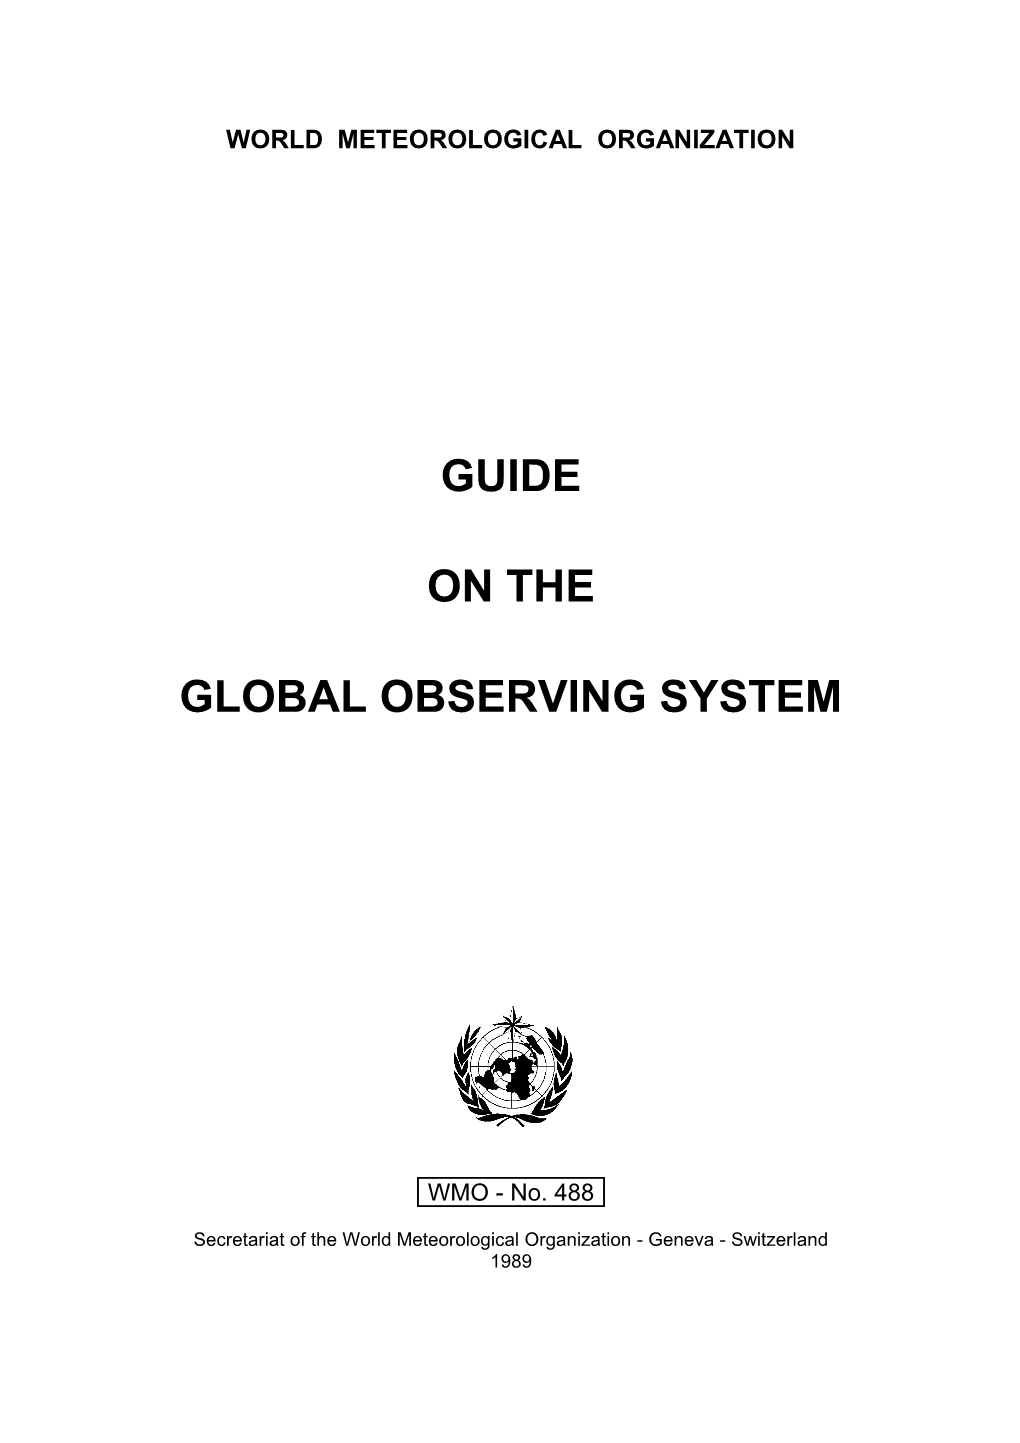 Inconsistencies and Findings in Manual on GOS, WMO-No